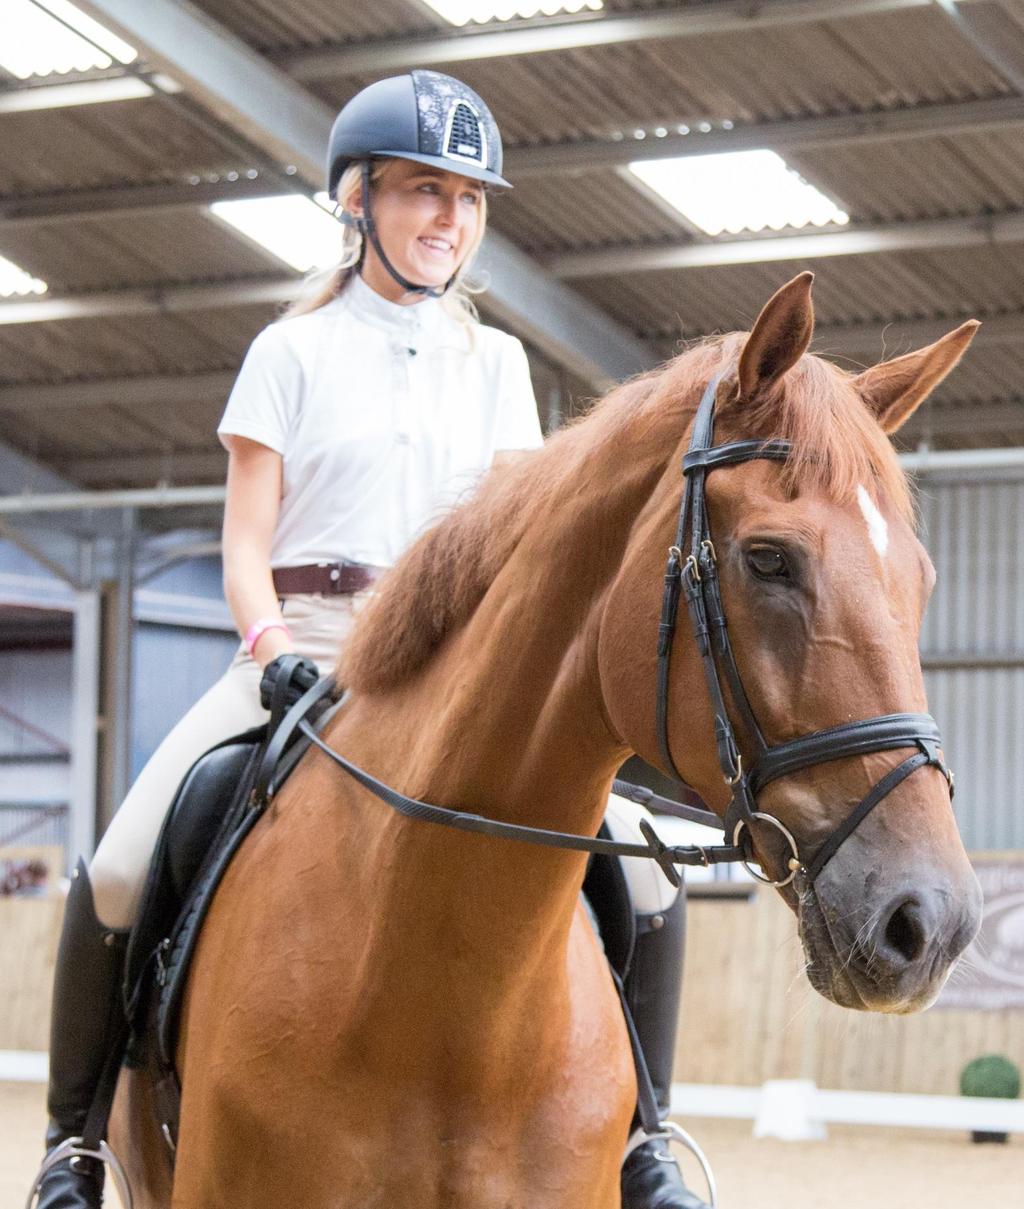 International Dressage Rider and Trainer and Rachel Gallop International Show Jump Rider and Trainer Train and observe training with the industry's best, such as Carl Hester, MBE - British Dressage